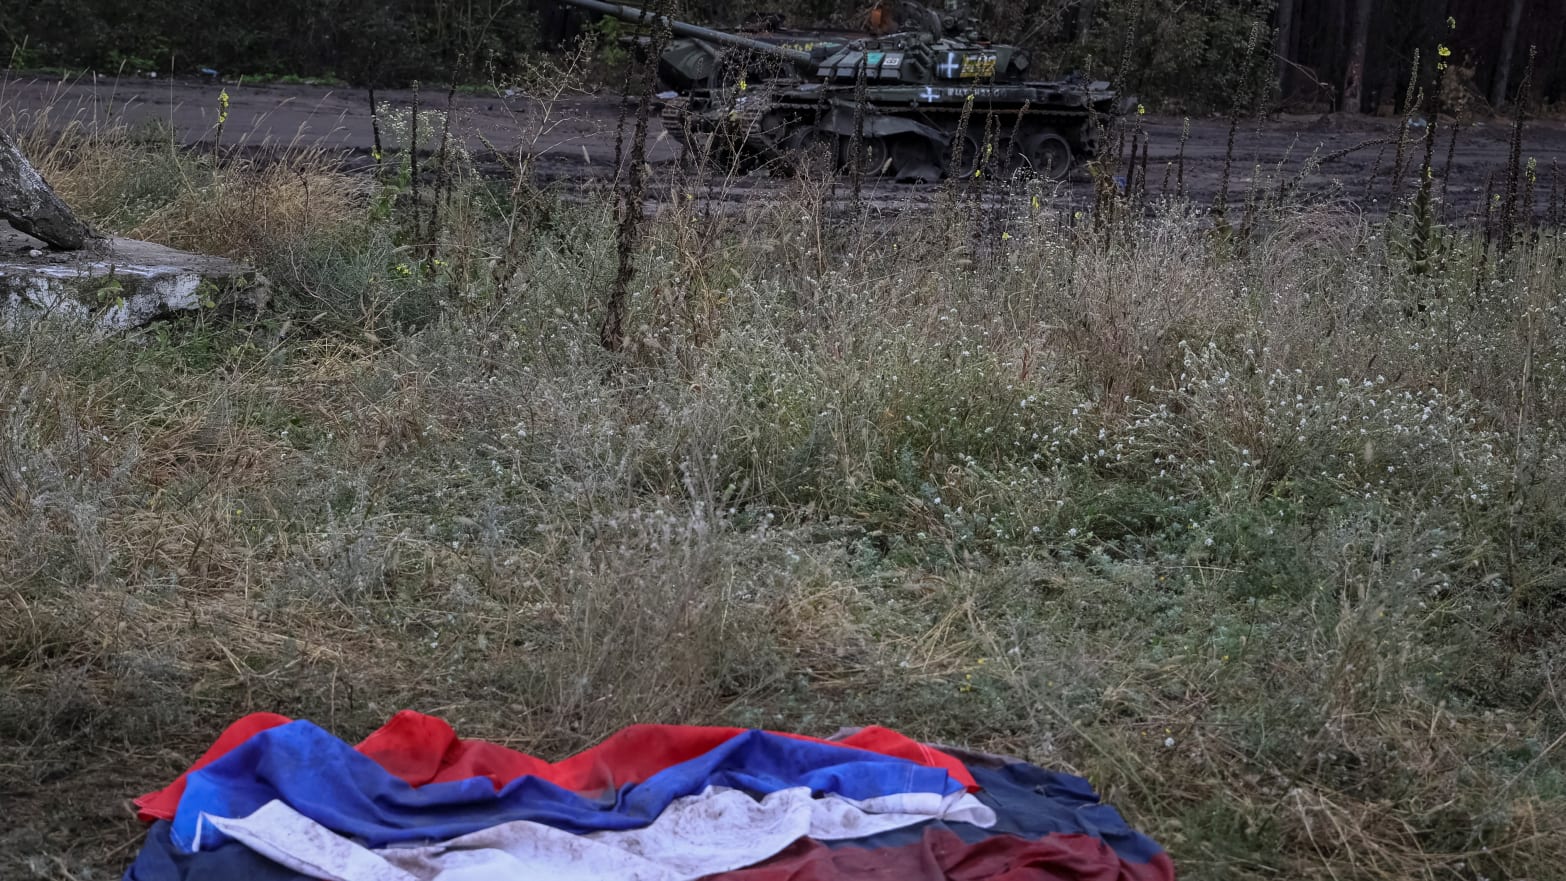 A Russian national flag lies on the ground near a destroyed Russian tank in the town of Izium, Ukraine, on Sept. 14, 2022.